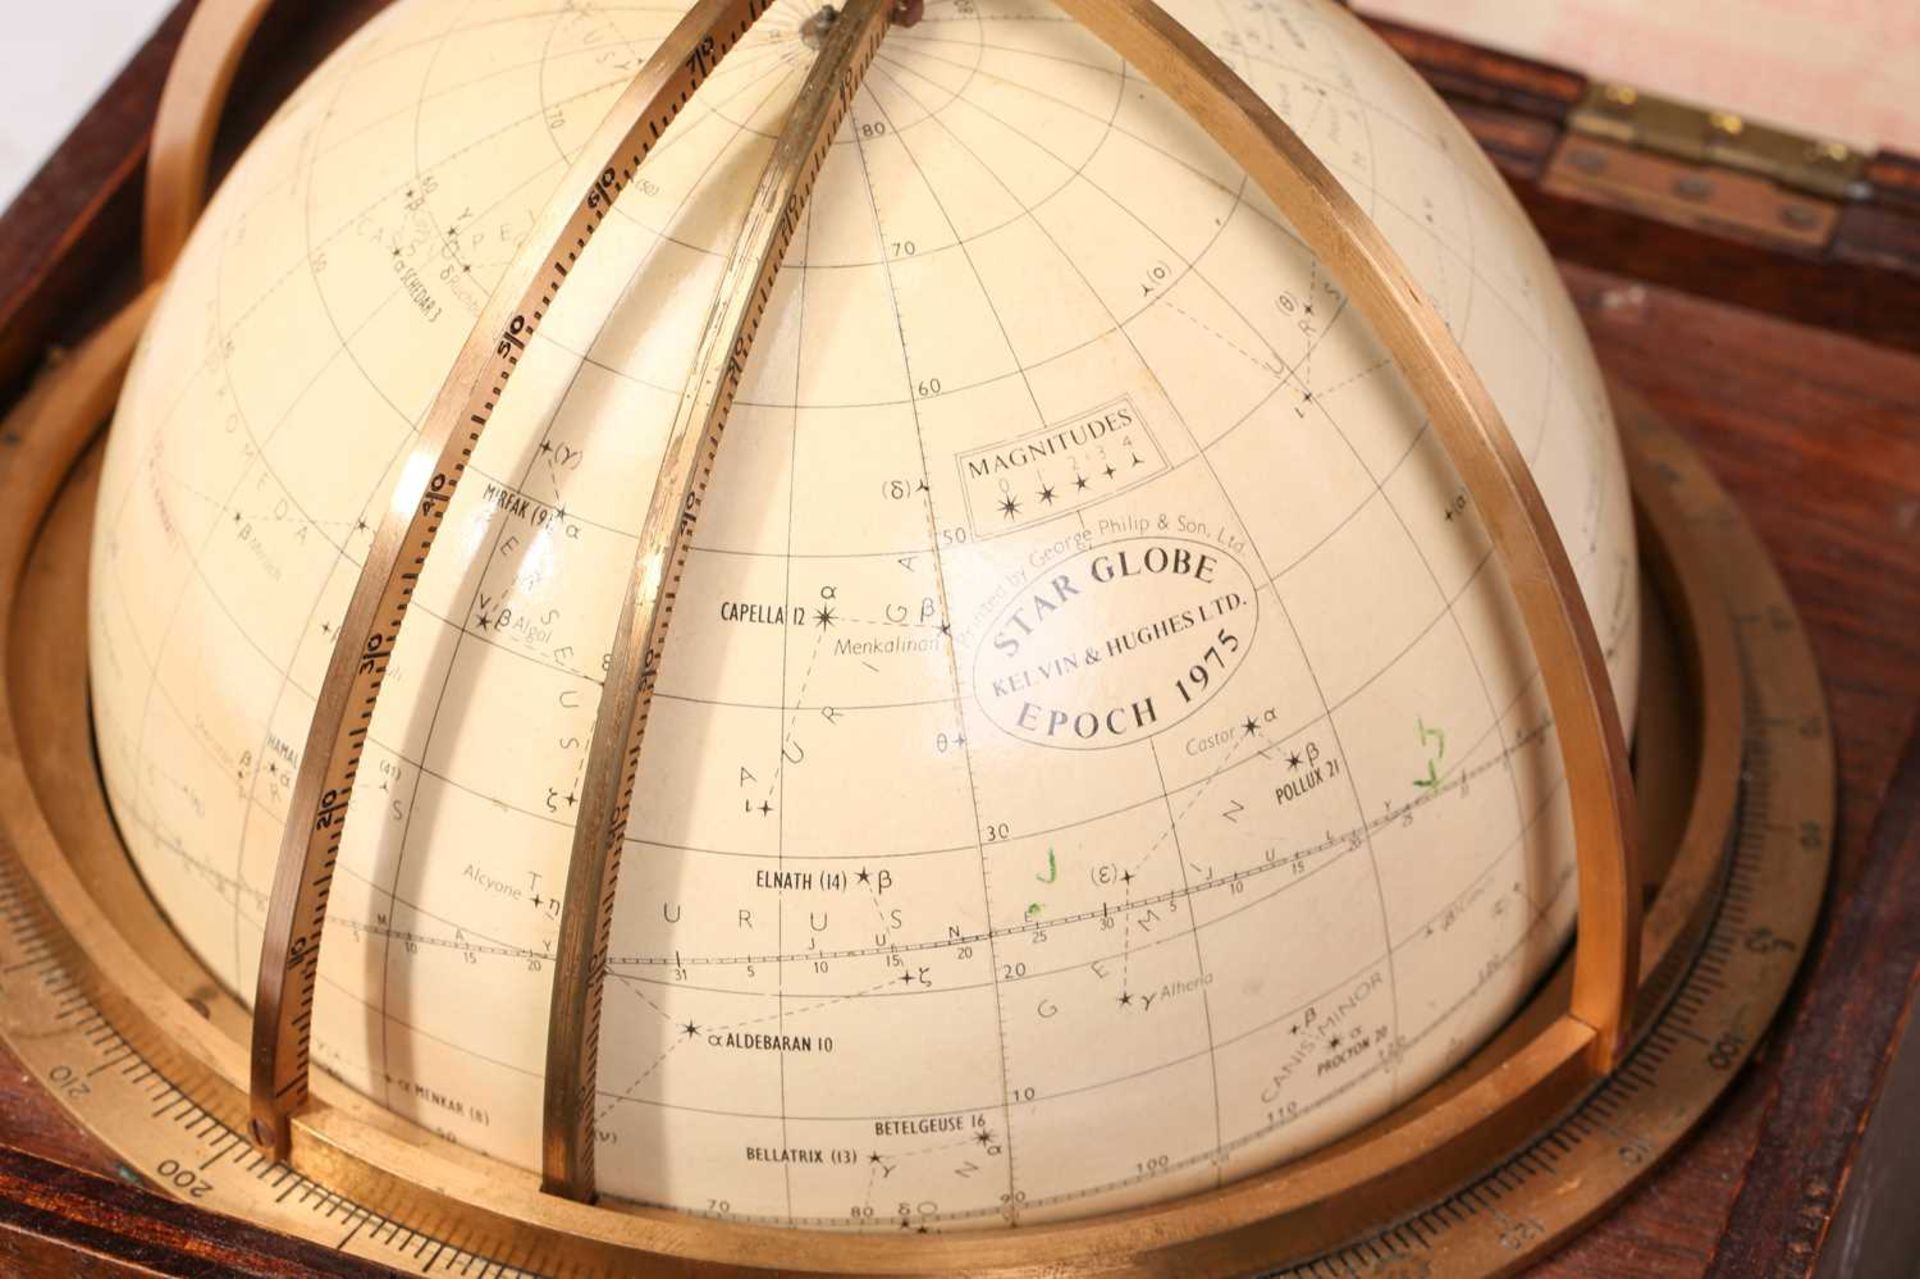 A Kelvin & Hughes 'Epoque' Star Globe (1975 Twilight Setting Pattern), boxed with a lacquered - Image 12 of 14